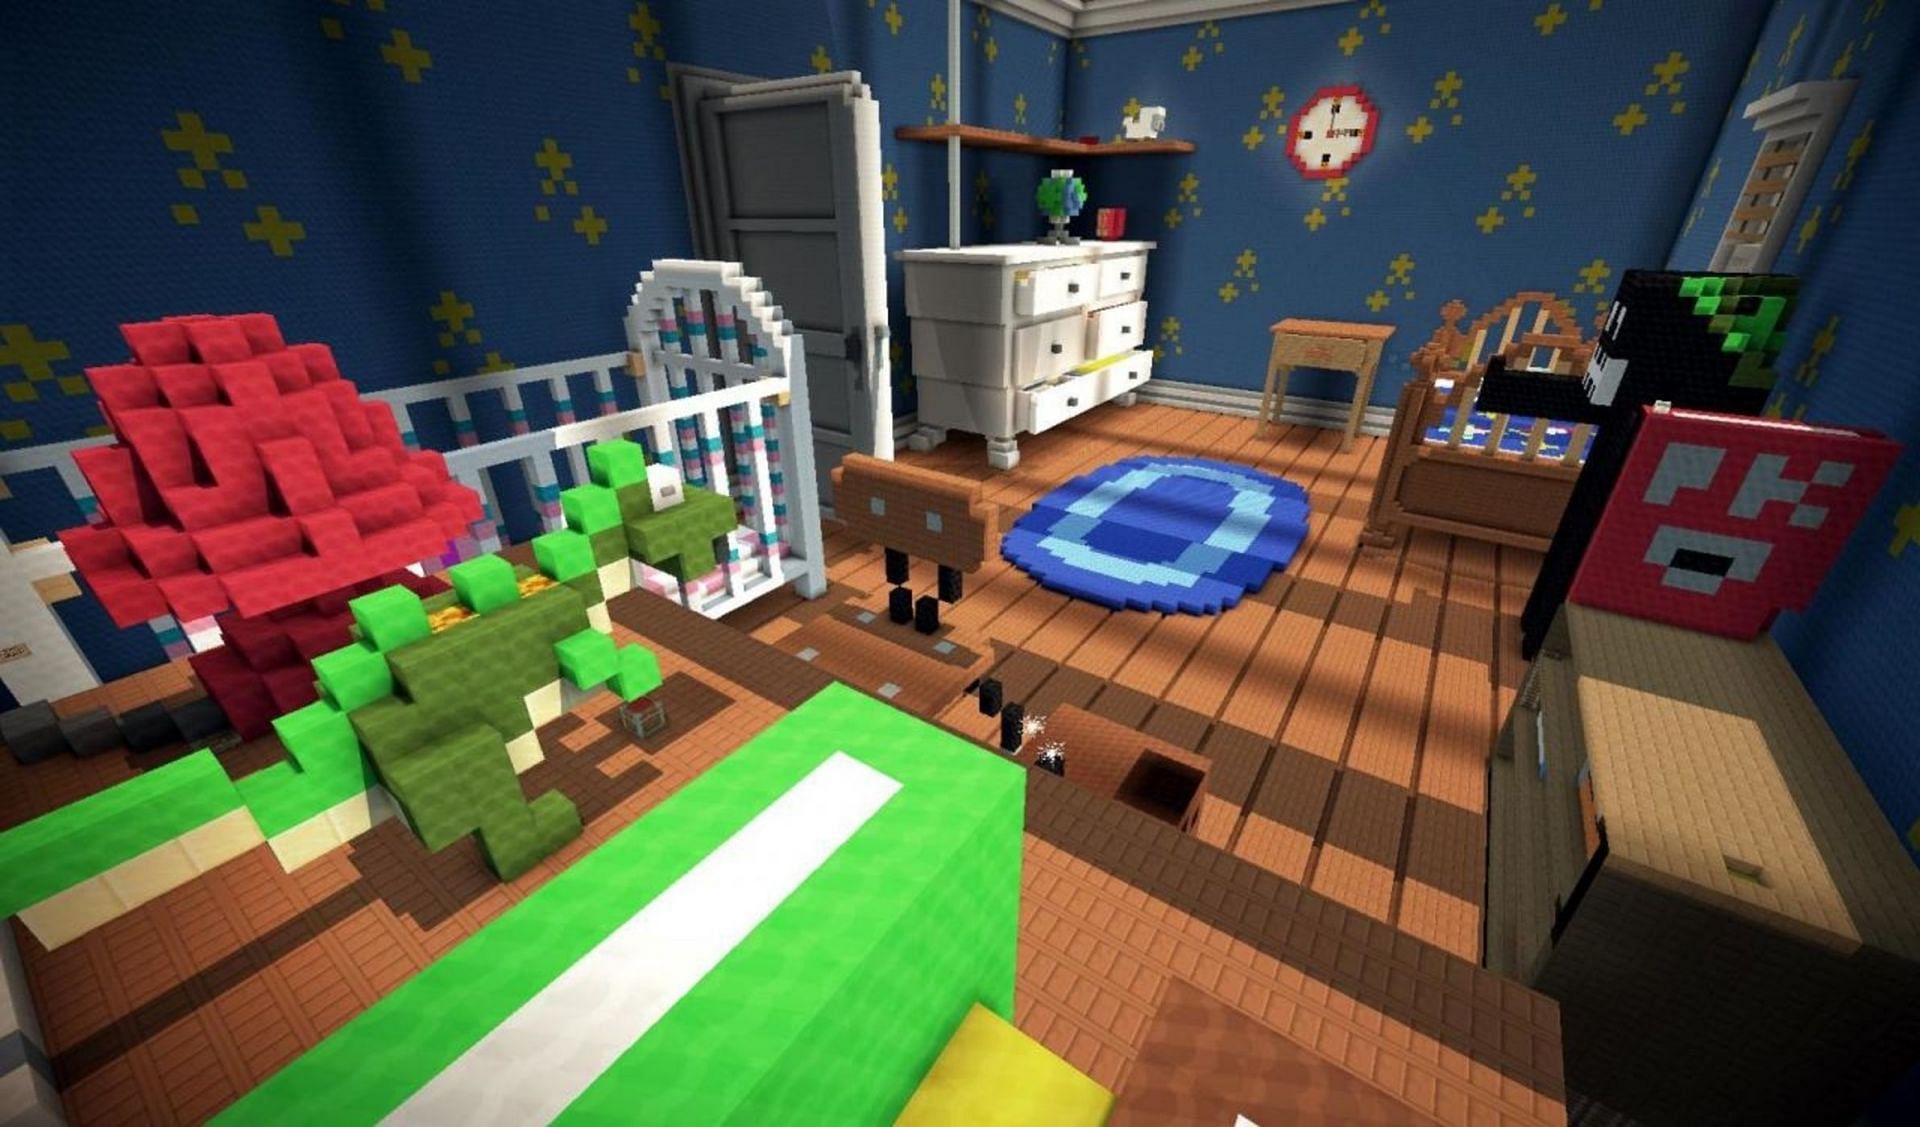 Andy&#039;s room lovingly recreated in Minecraft (Image via PitchBlackPL/PlanetMinecraft)